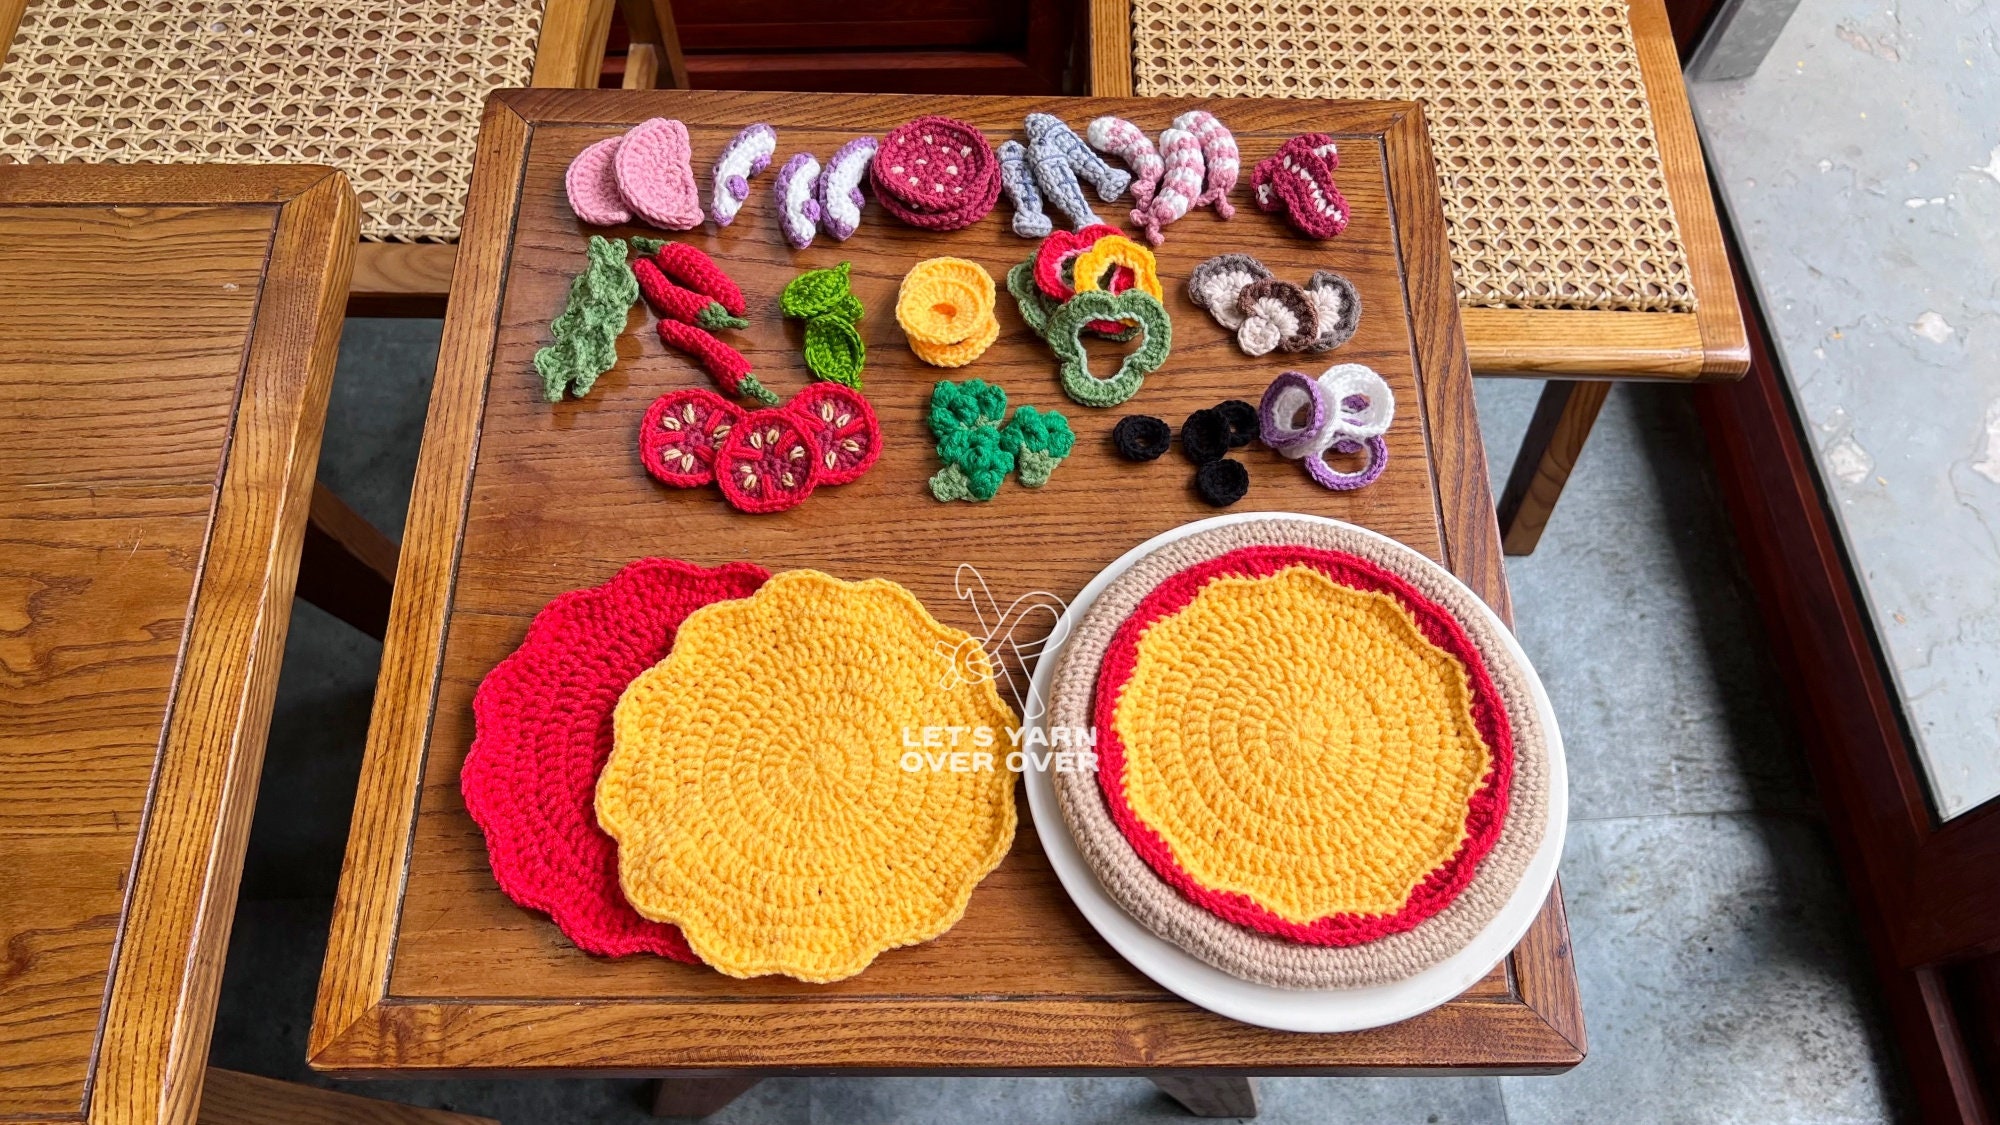  Let's Make a Pizza - Pretend Food Playset with 4 Wooden Pie  Slices, 140 Felt Toppings, Wood Roller, and 3-in-1 Cardboard Box Prep  Station, Oven, & Serving Table - Cute Cooking